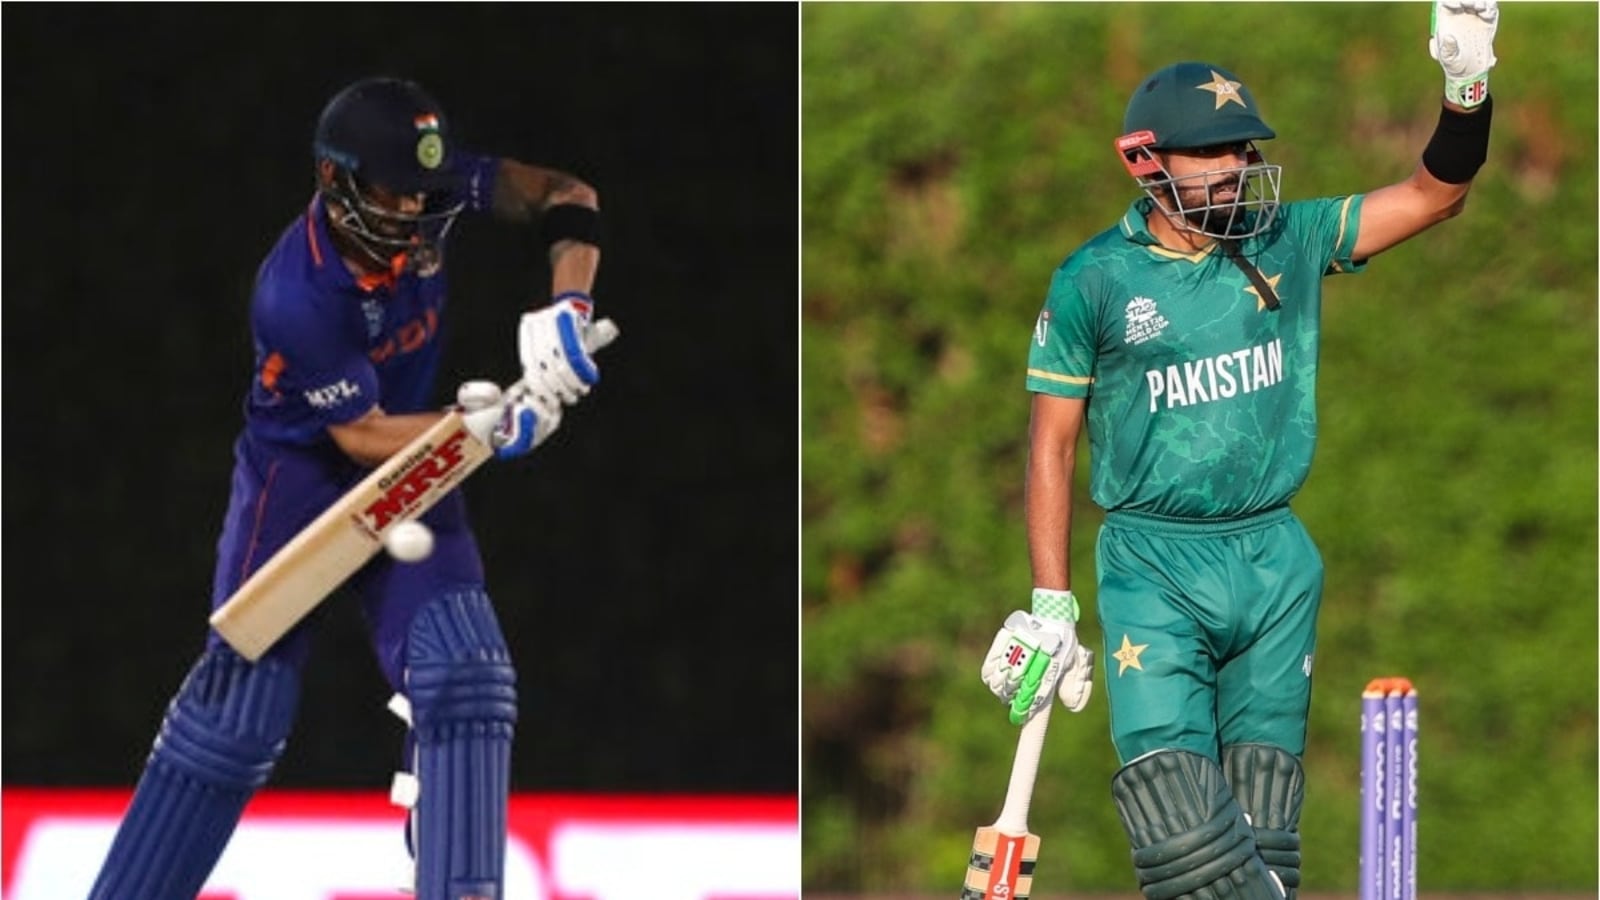 India Vs Pakistan, T20 World Cup 2021 Live Streaming When and where to watch IND vs PAK Super 12 match Live on TV, online Cricket